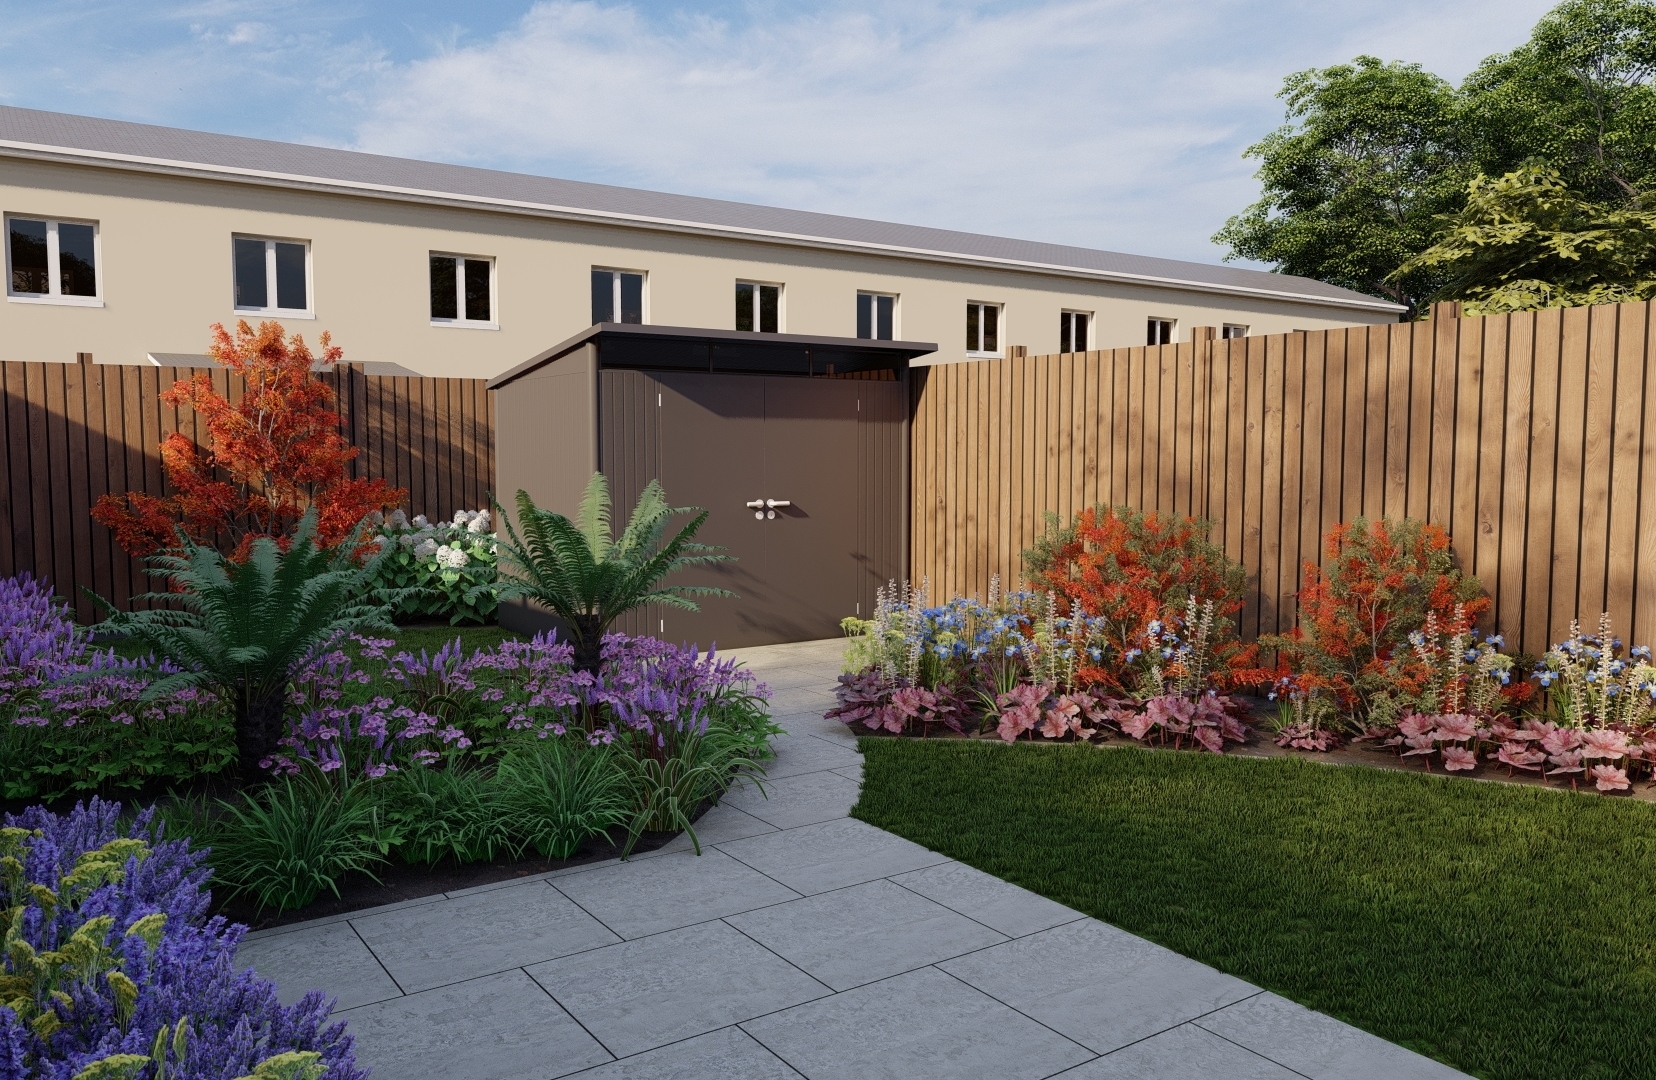 Design Visuals for a Family Garden in Ashtown, Dublin 15 featuring natural grass lawn, limestone paving, Biohort Garden Shed and mixed low maintenance  planting.